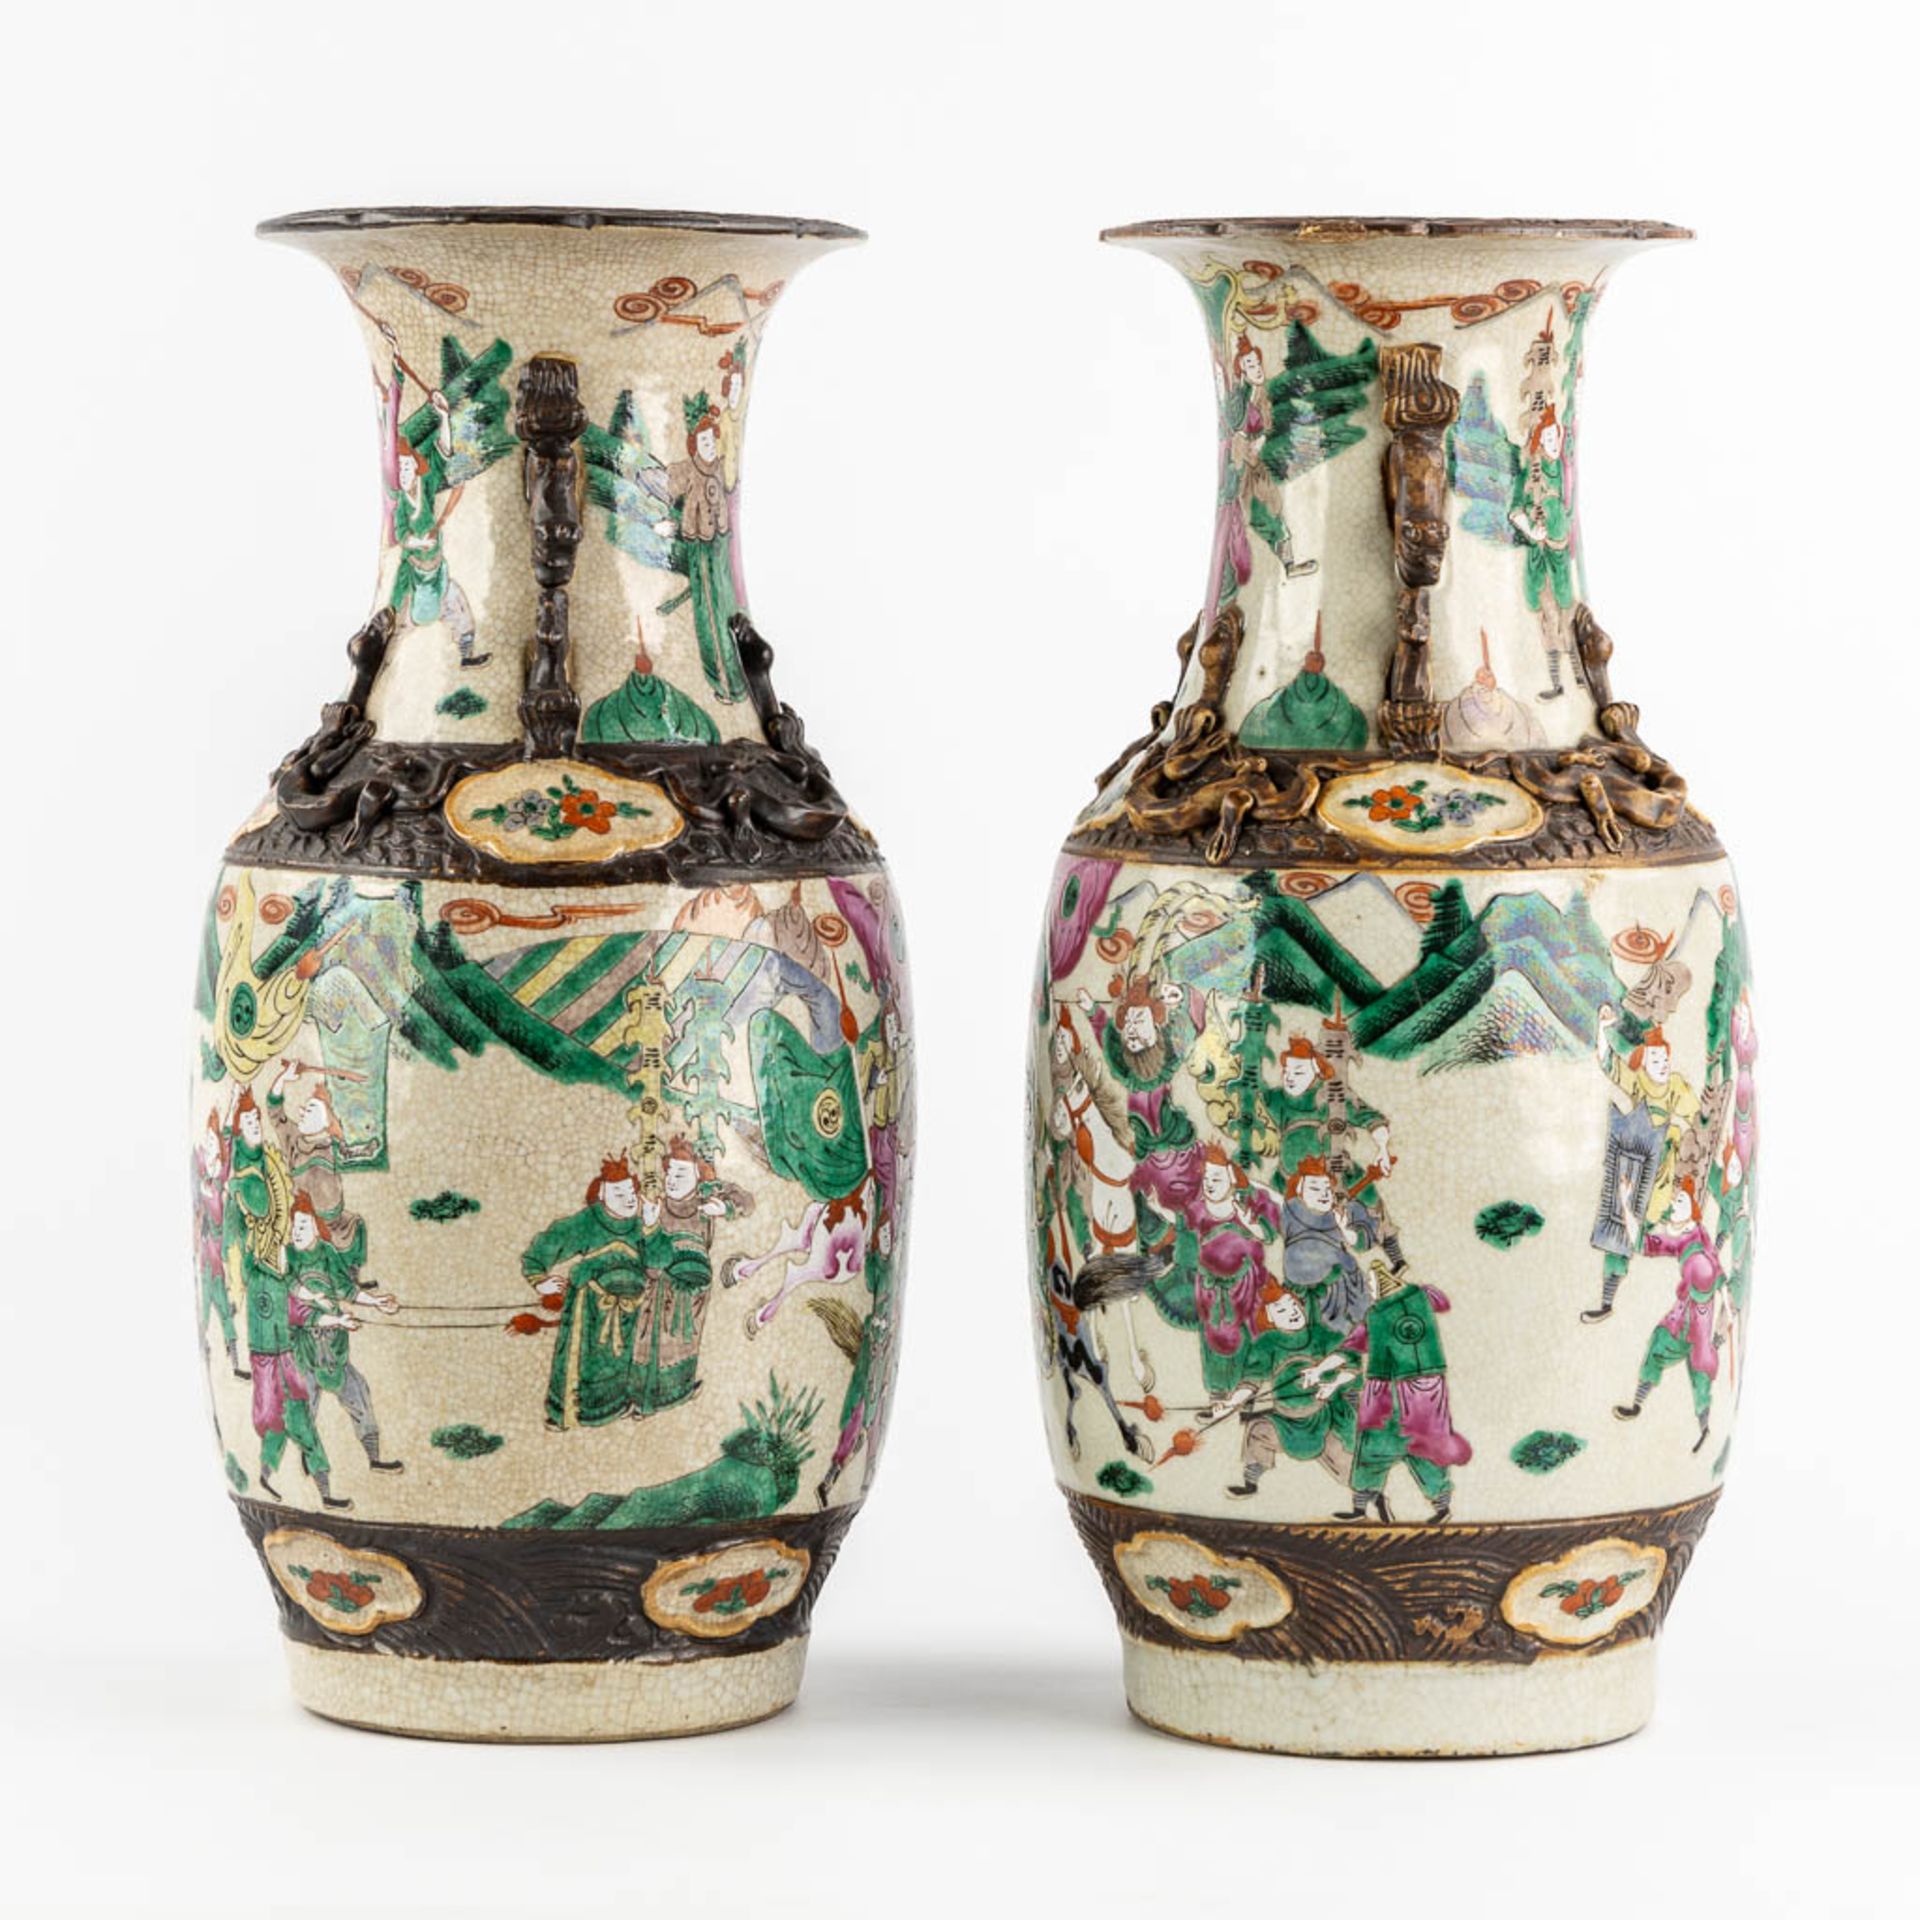 A pair of Chinese Nanking vases, decorated with battle scènes. (H:44 x D:20 cm) - Image 5 of 13